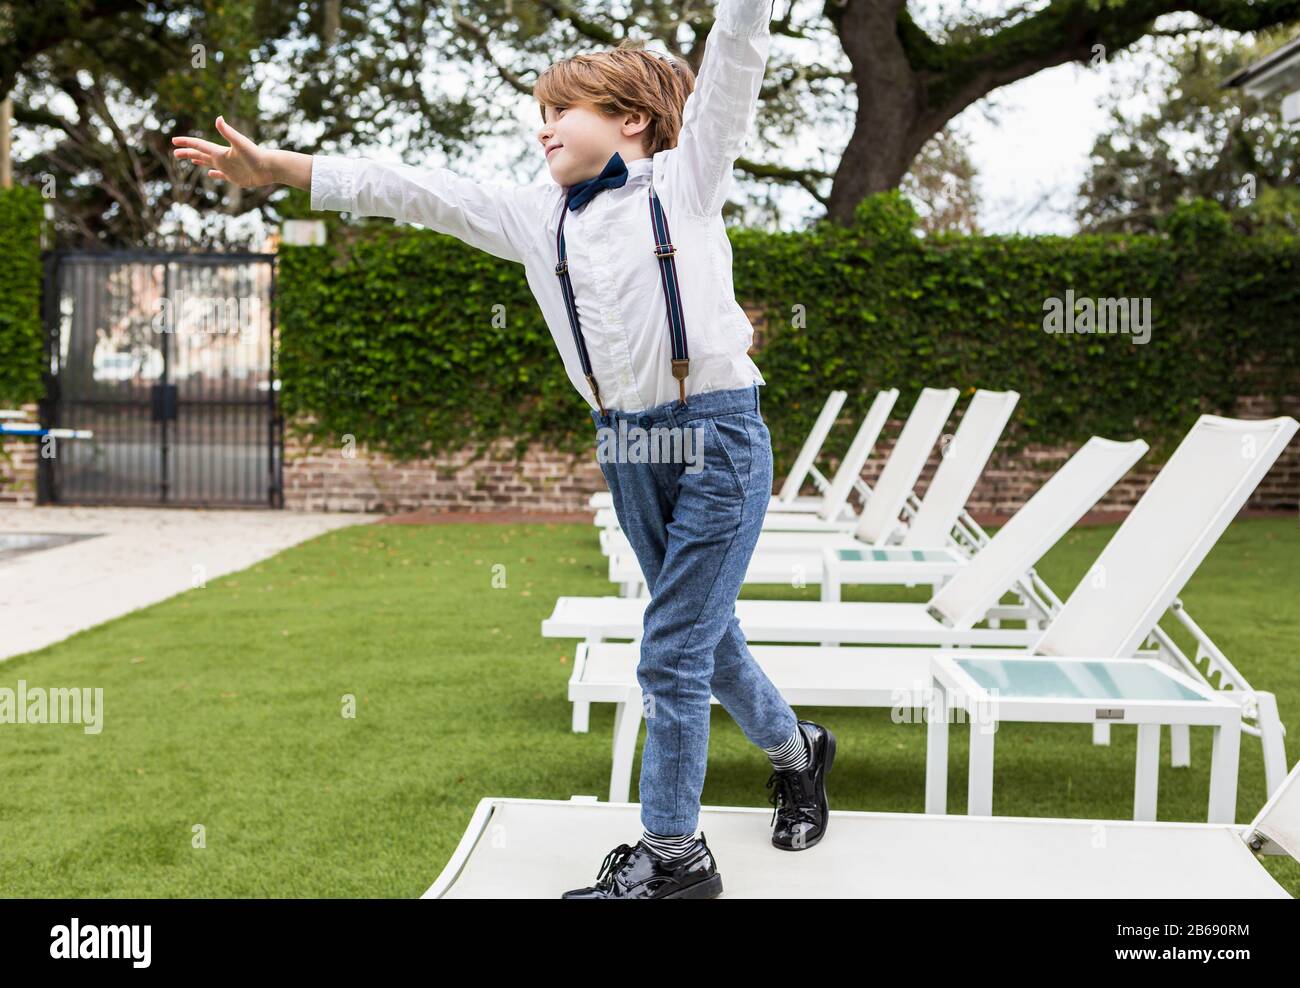 6 year old boy standing on lawn chair Stock Photo